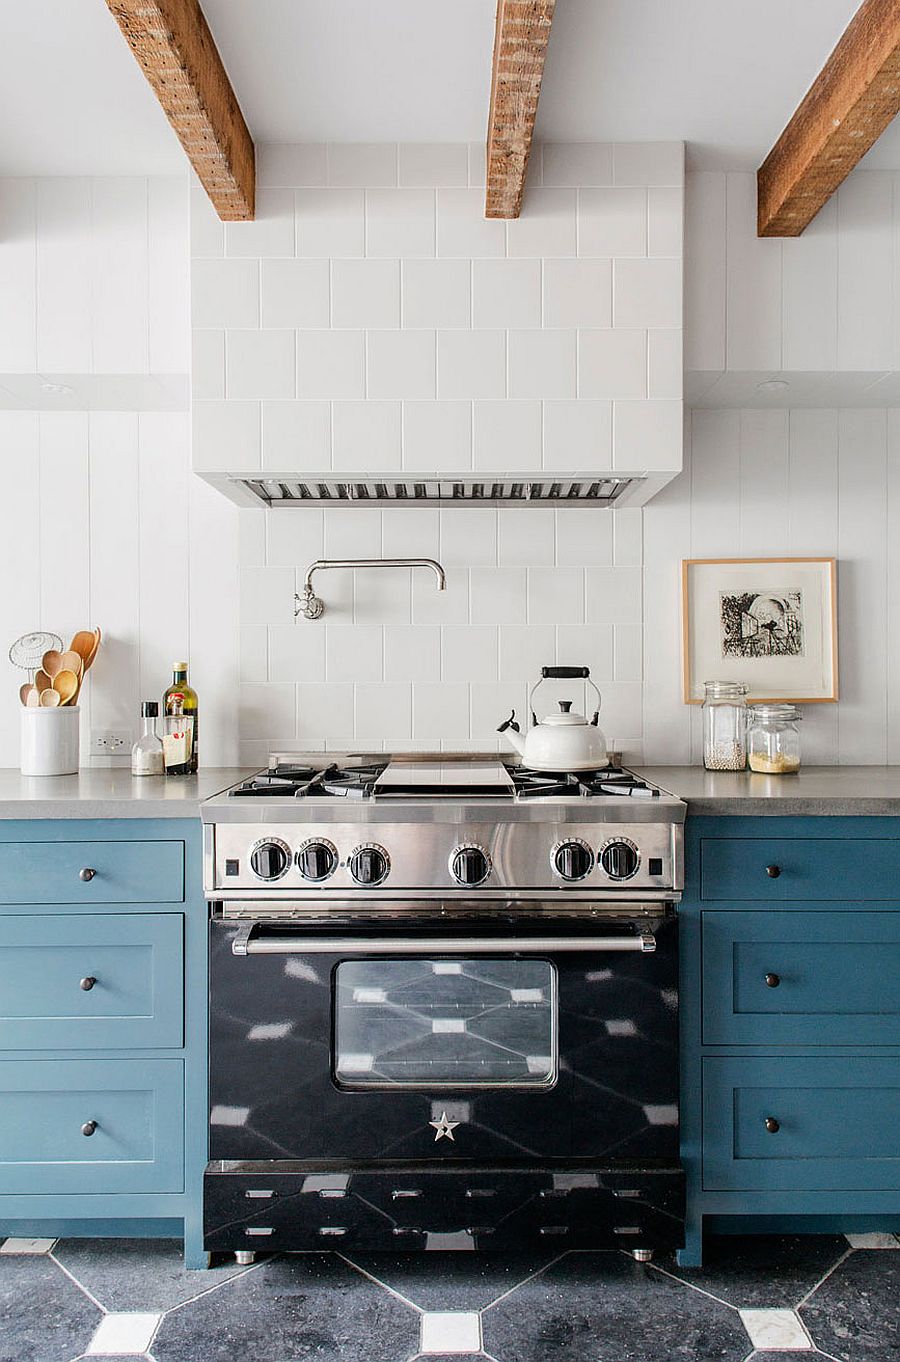 Gorgeous kitchen range in black stands out thanks to the neutral backdrop and blue cabinets